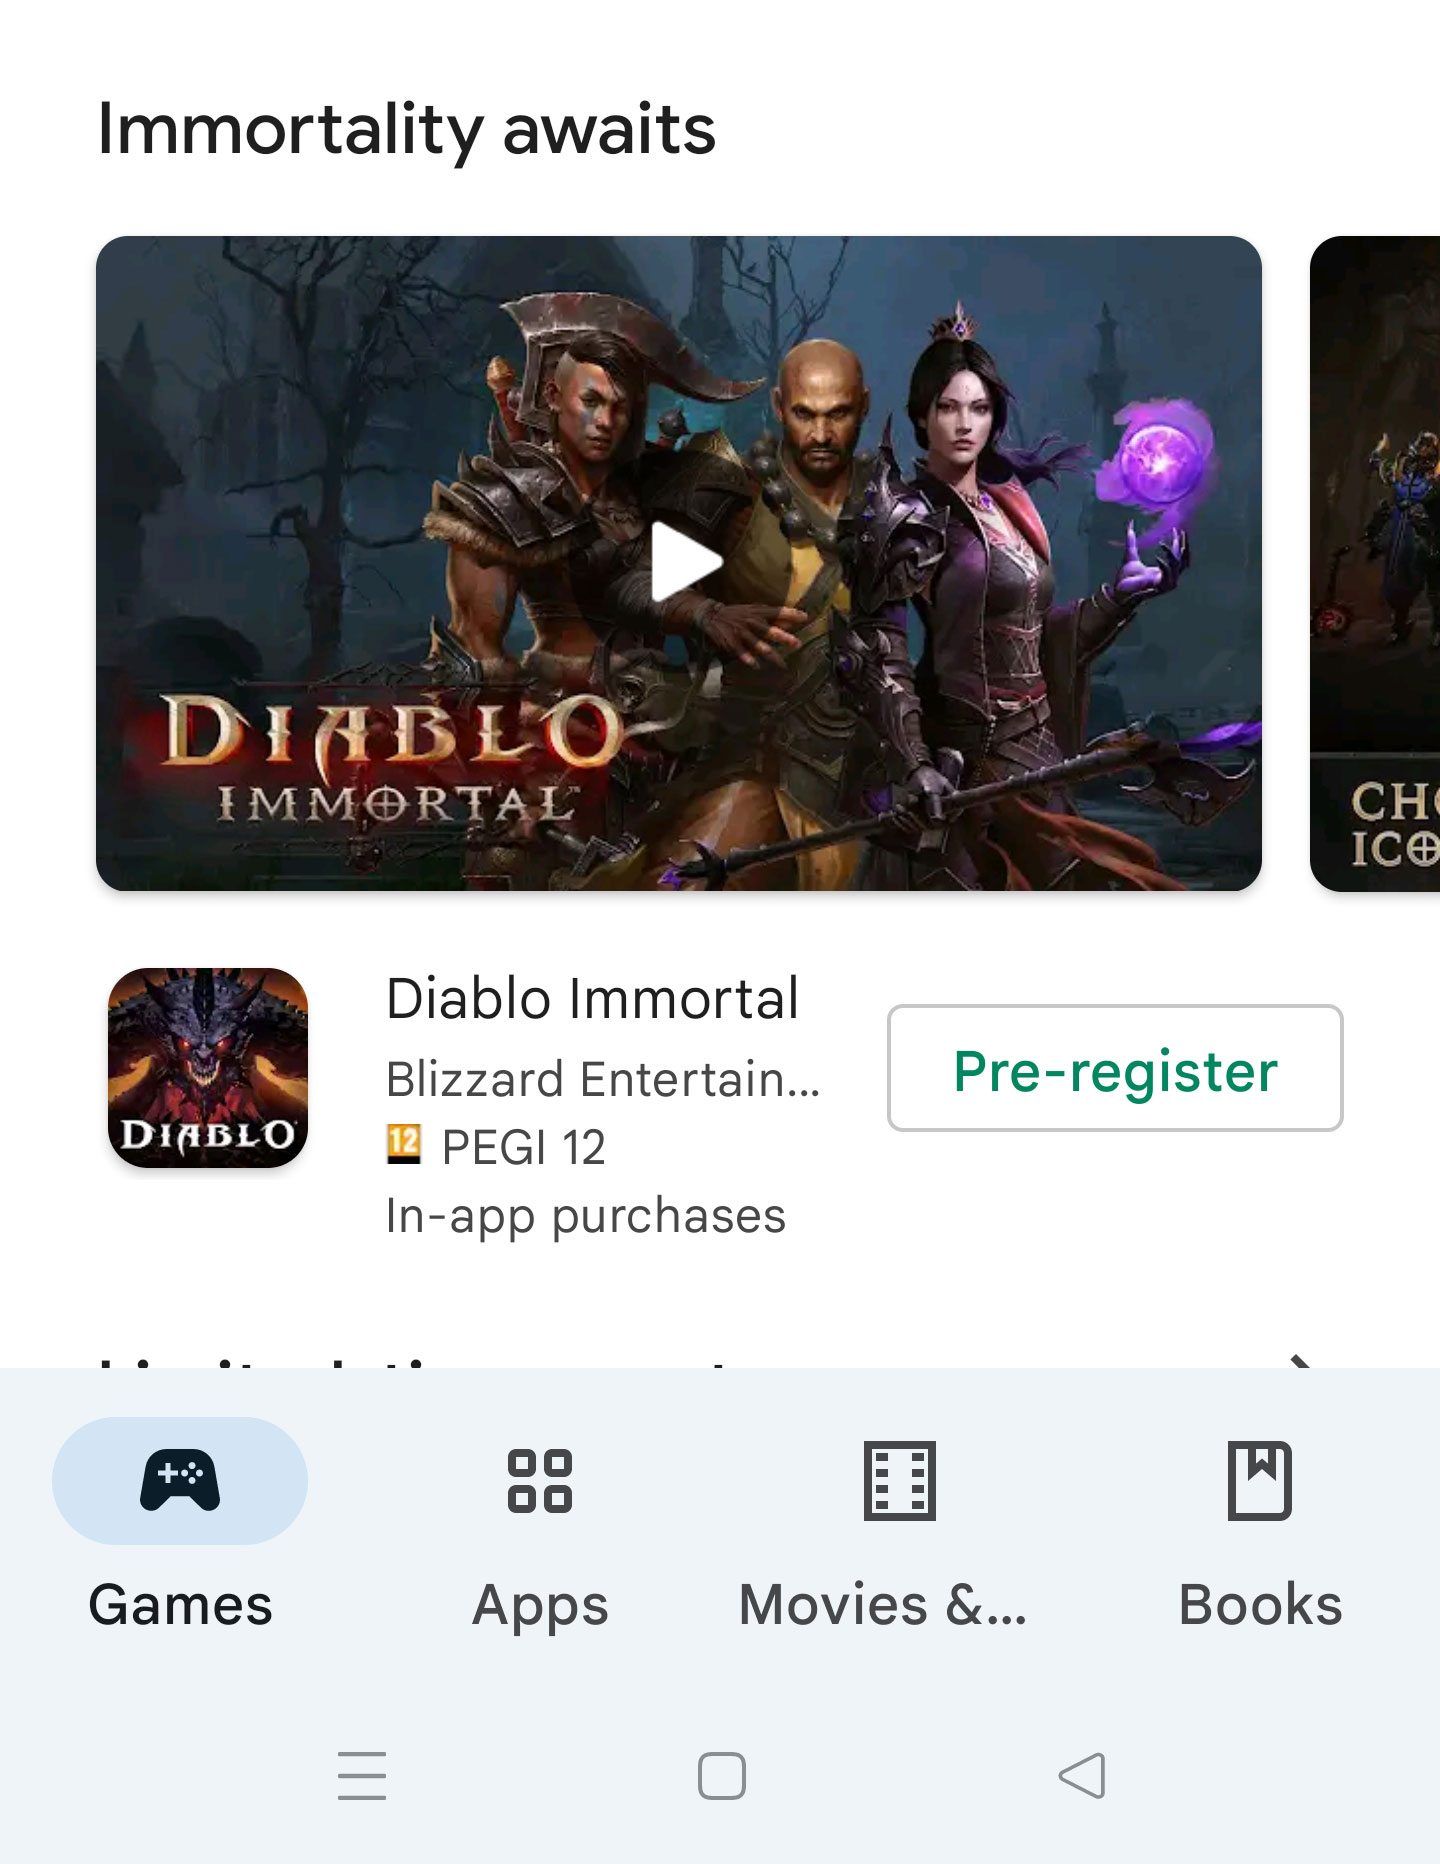 Example of app pre-registration advertising on Google Play